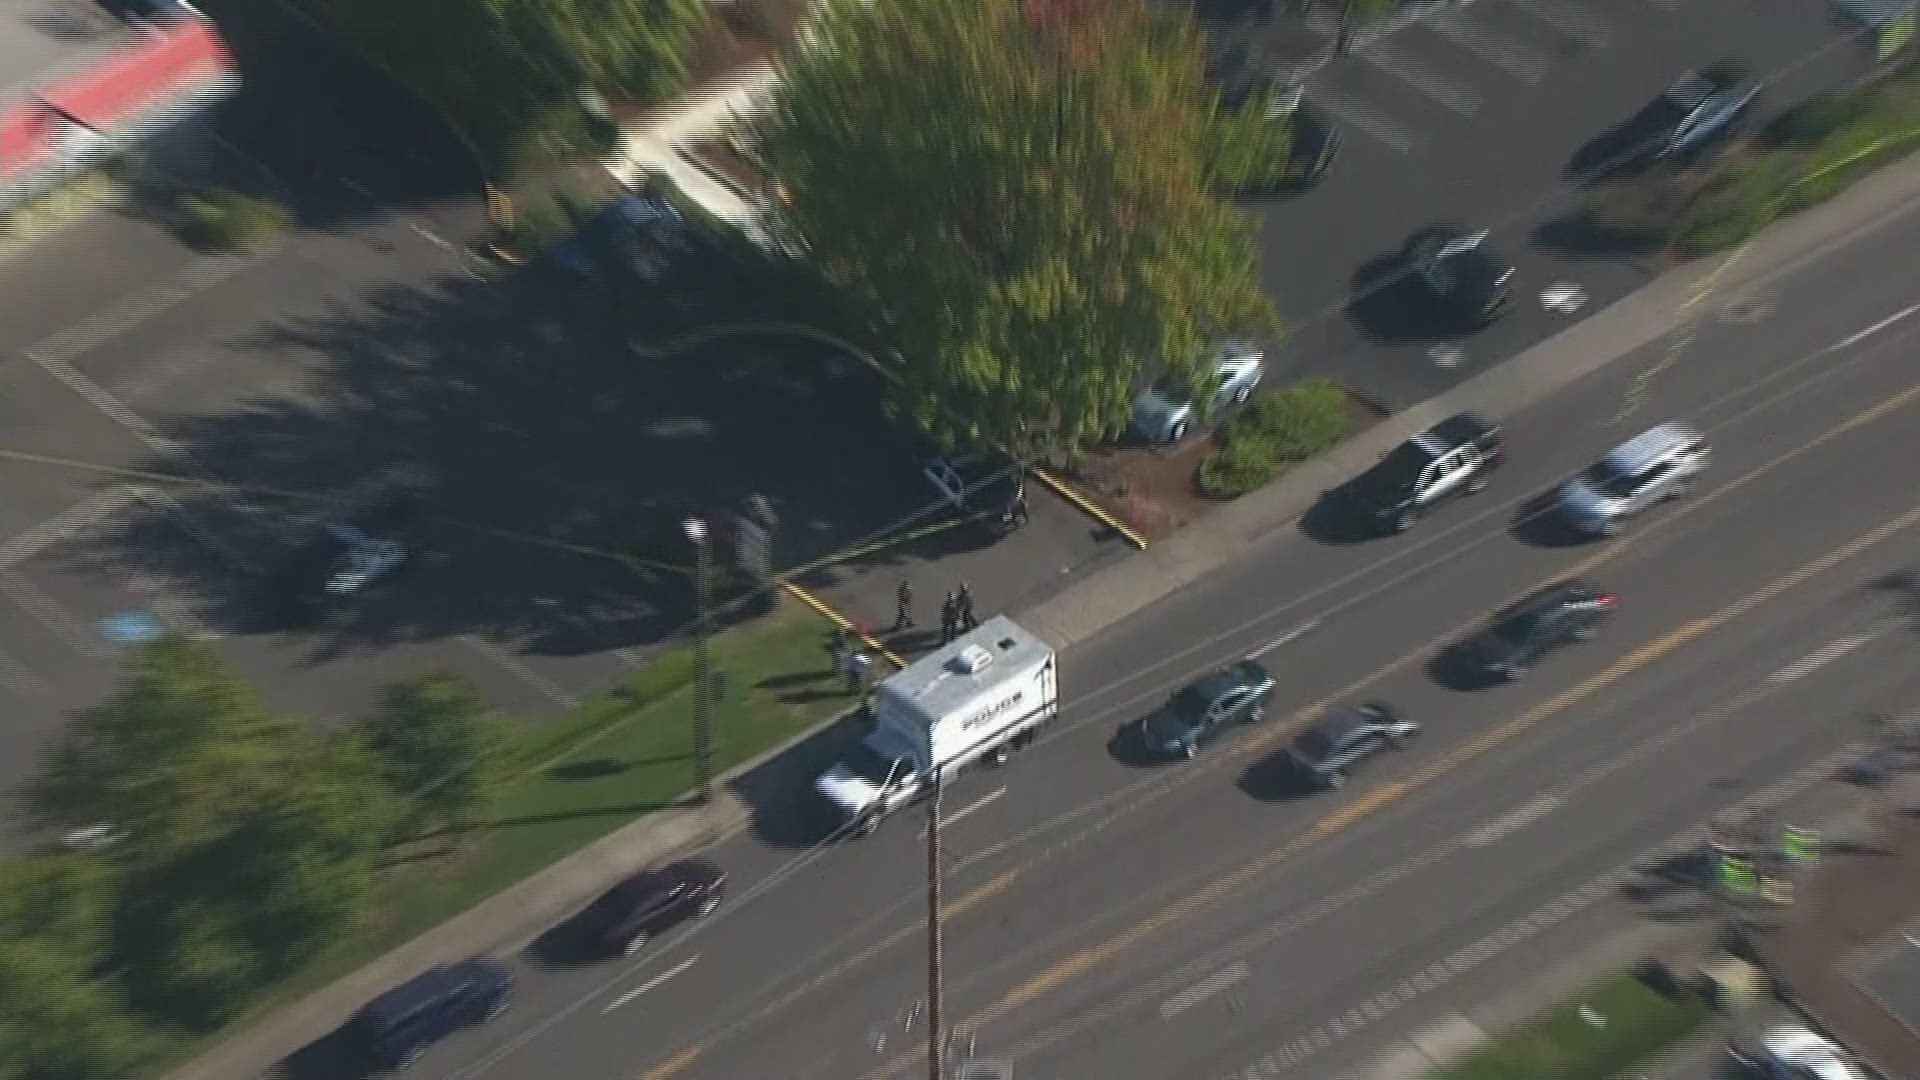 Sky8 was over the scene as police investigated an officer-involved shooting near Beaverton's Jesuit High School: https://on.kgw.com/2MVkFqv